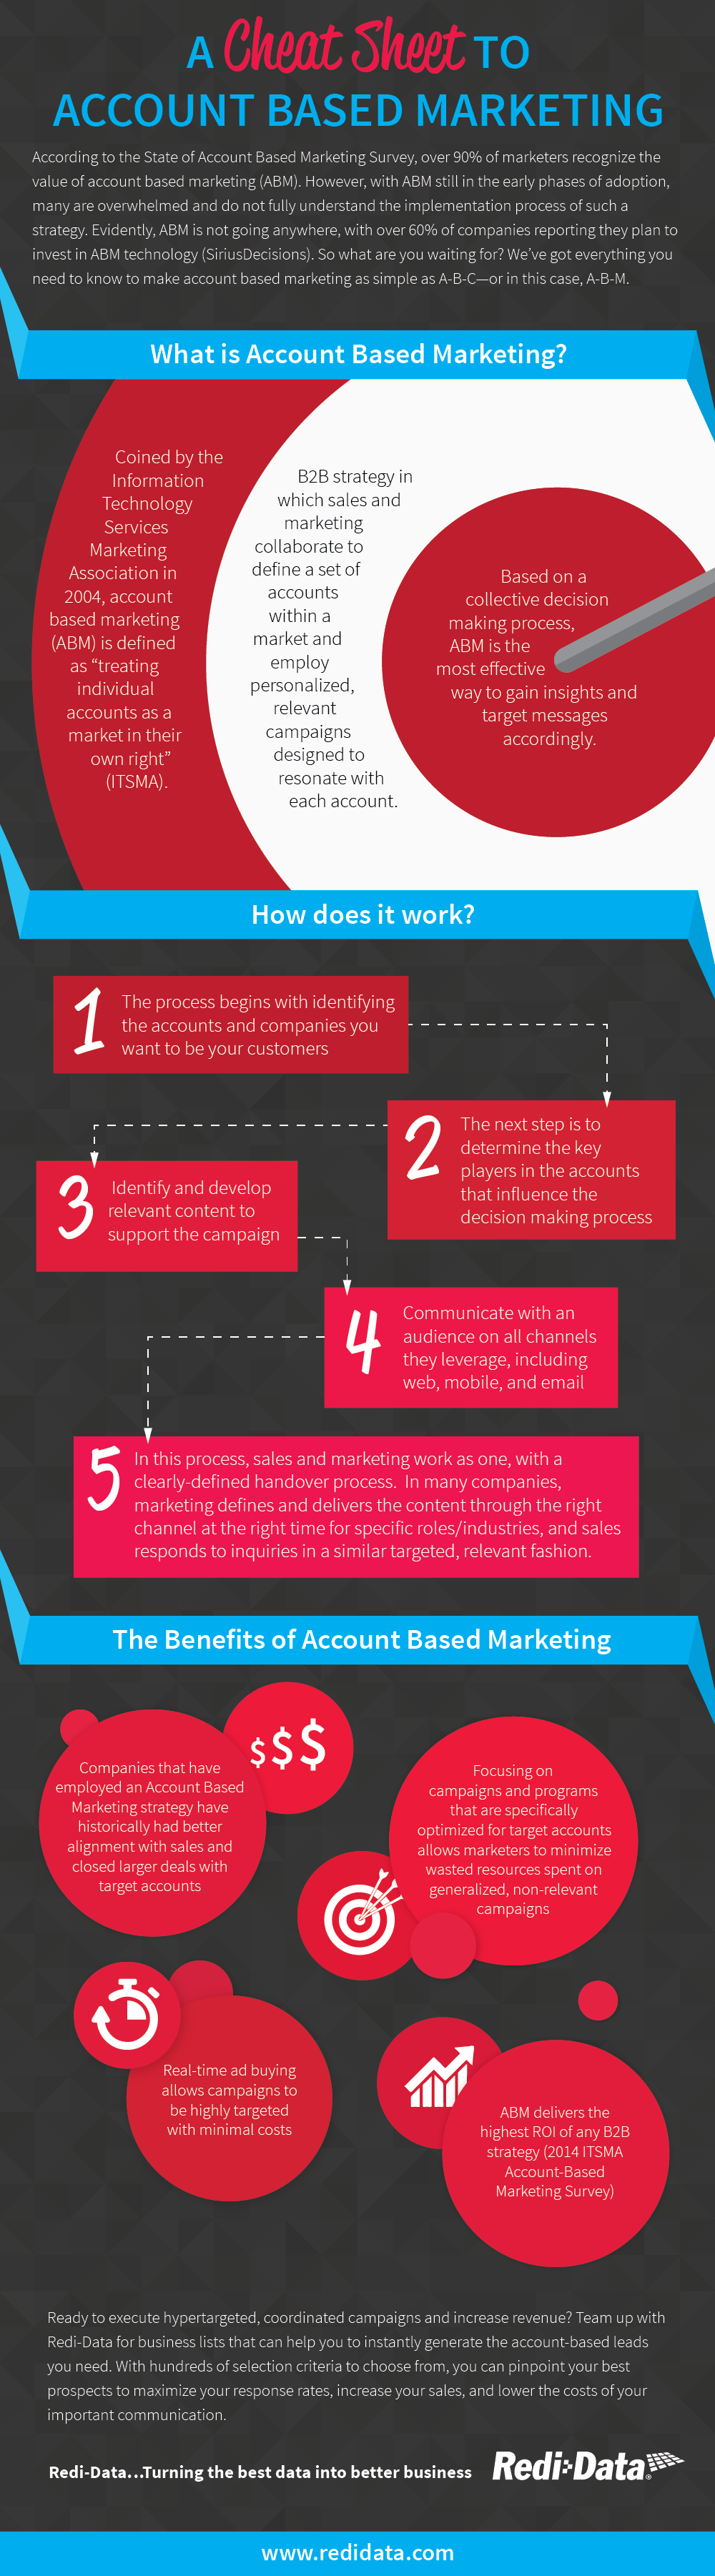 A Quick reference to Account based Marketing. Learn about its benefits and how Redi-Data can help you with its expert solutions!